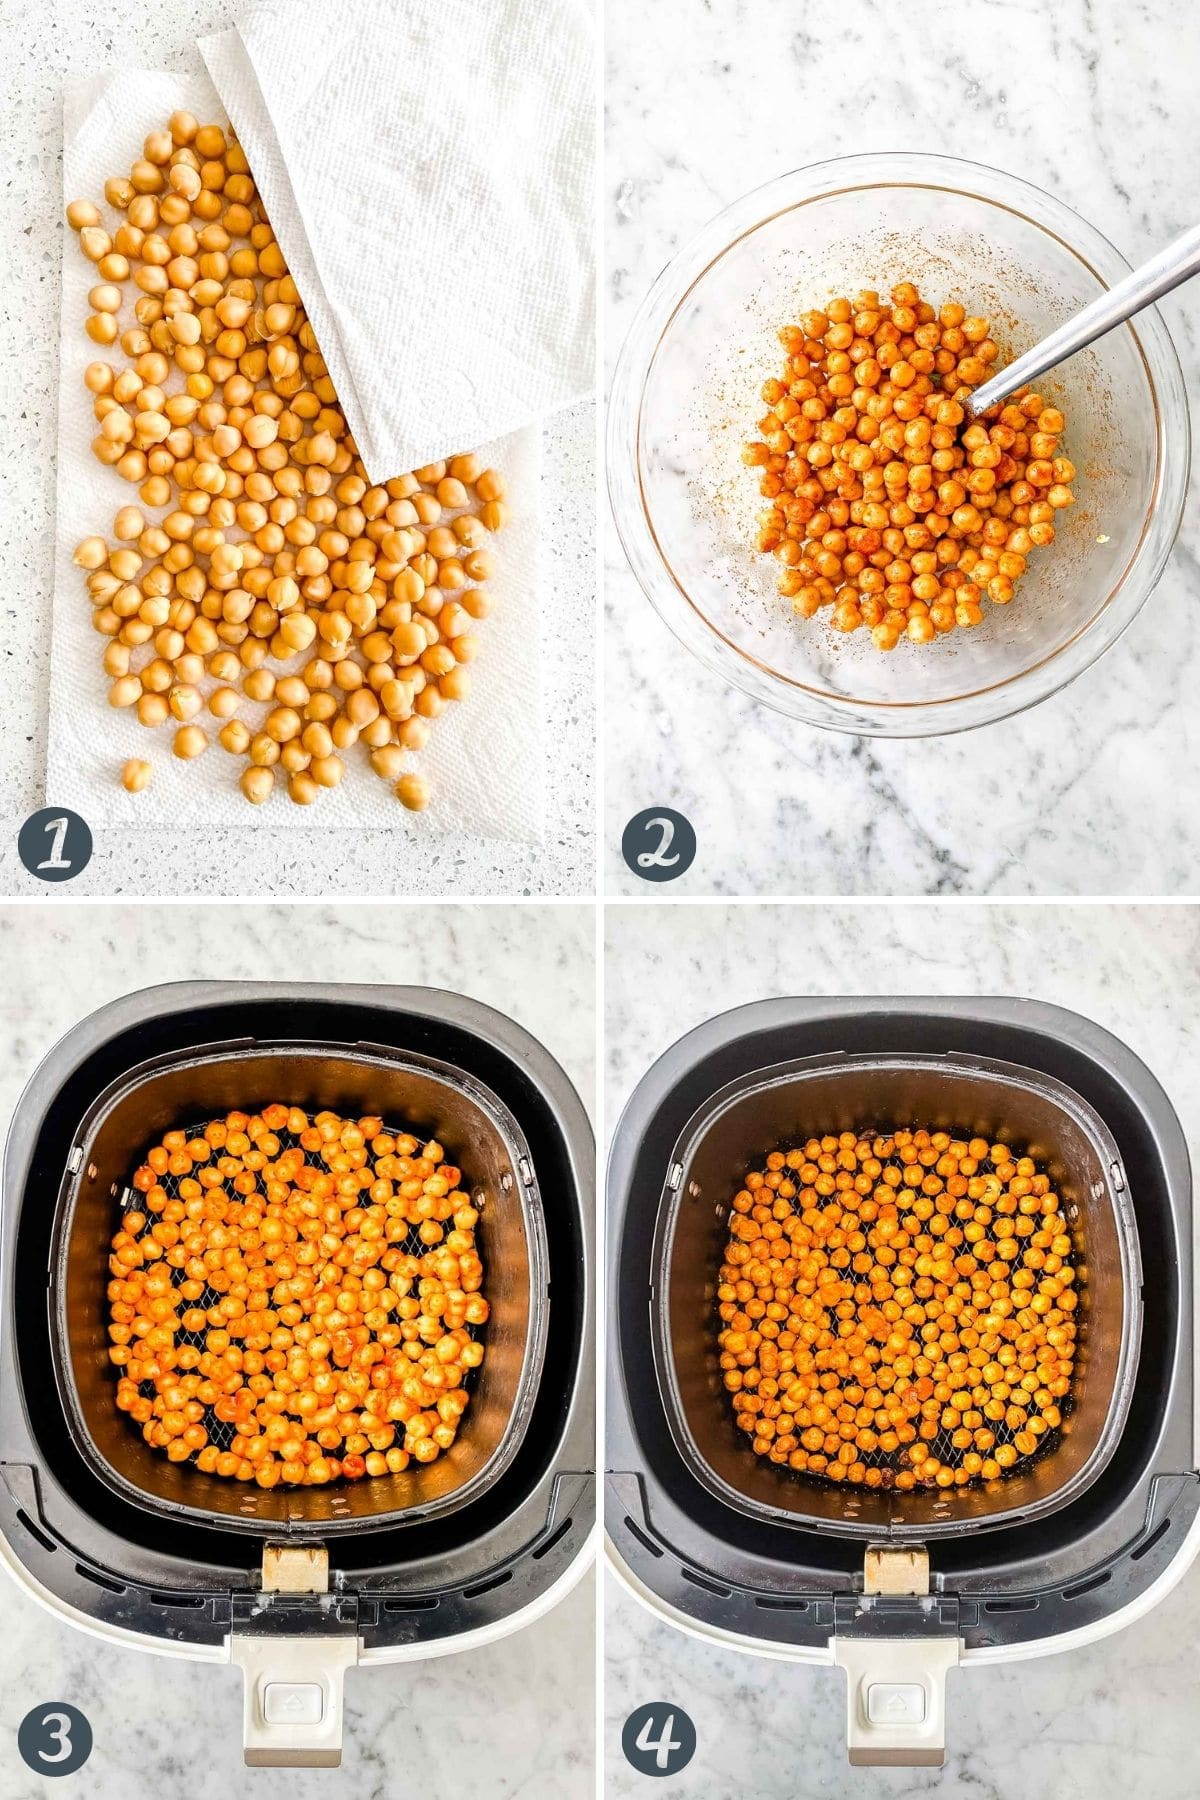 Steps for making Air Fryer Chickpeas